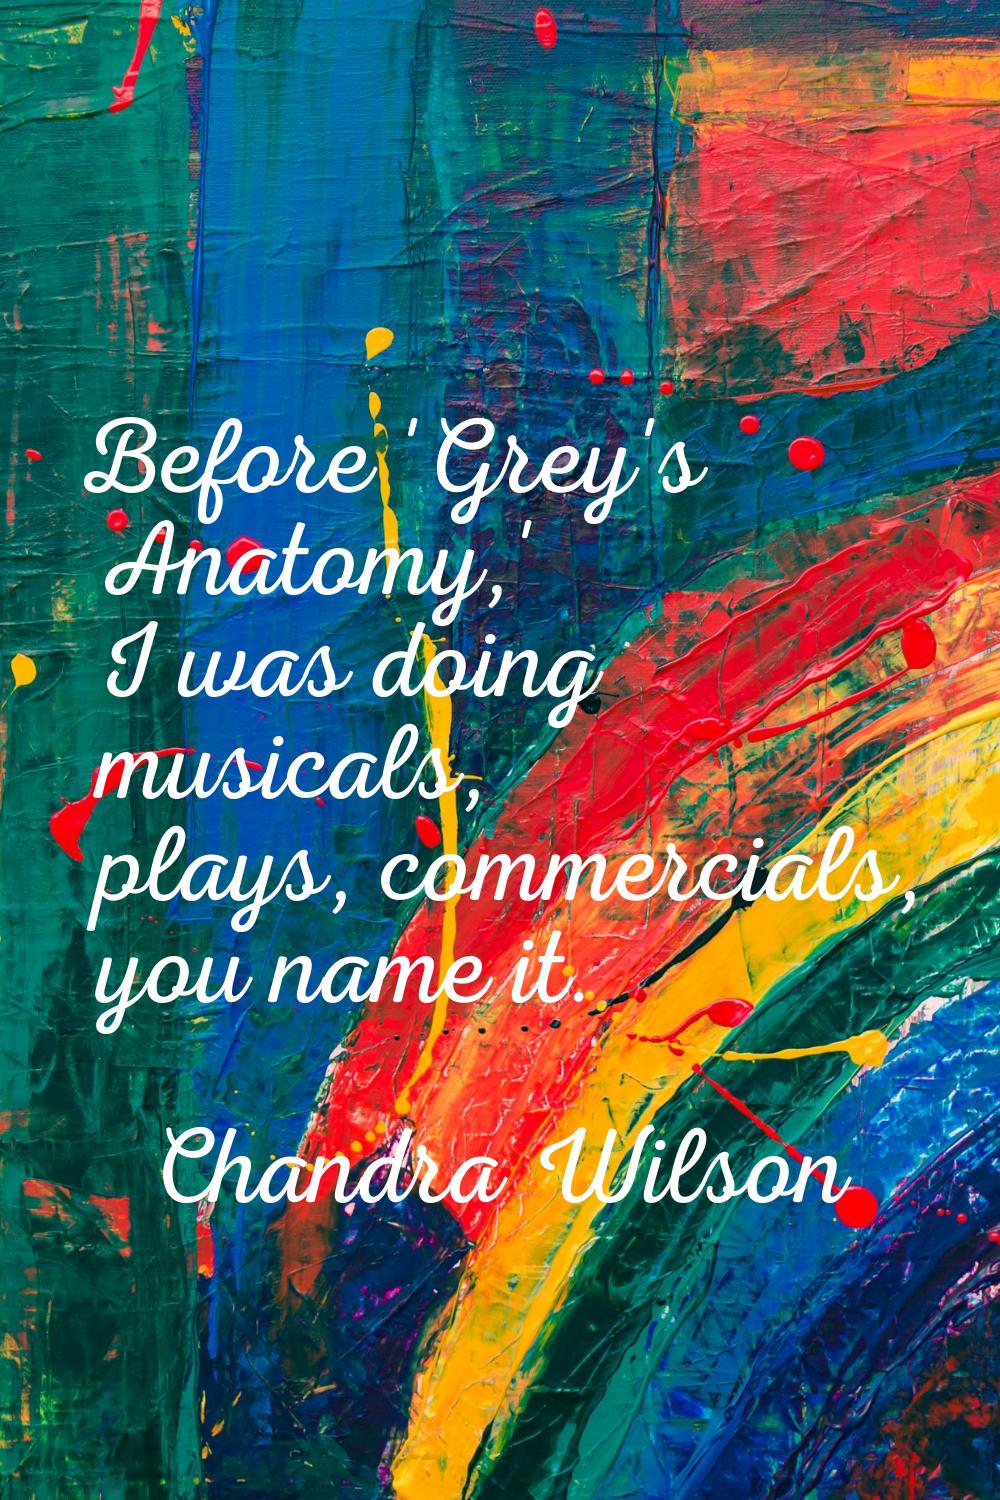 Before 'Grey's Anatomy,' I was doing musicals, plays, commercials, you name it.